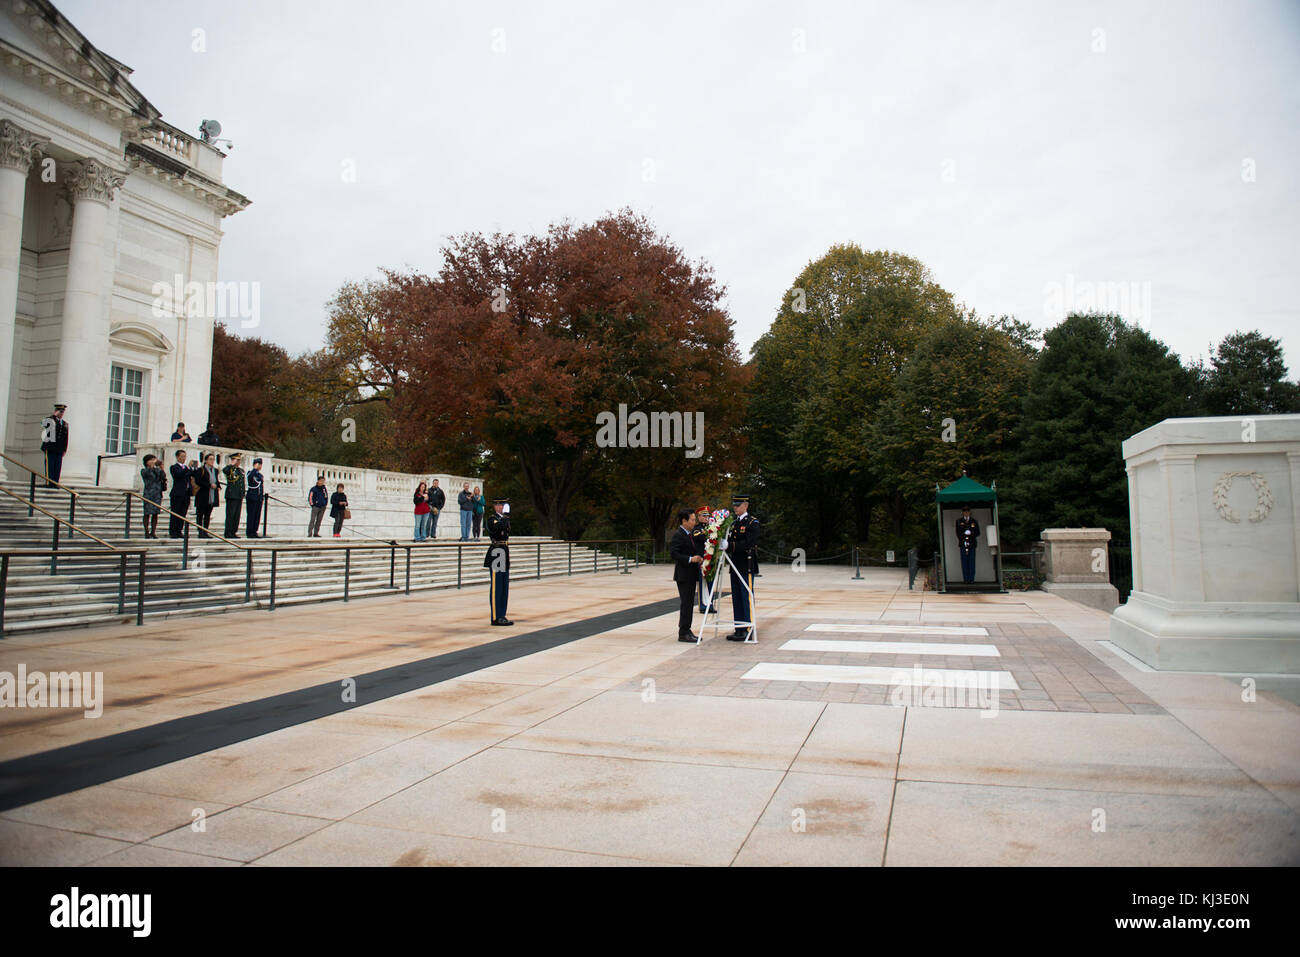 Gyeonggi Province Governor laid a wreath at the Tomb of the Unknown Soldier in Arlington National Cemetery (21898042784) Stock Photo